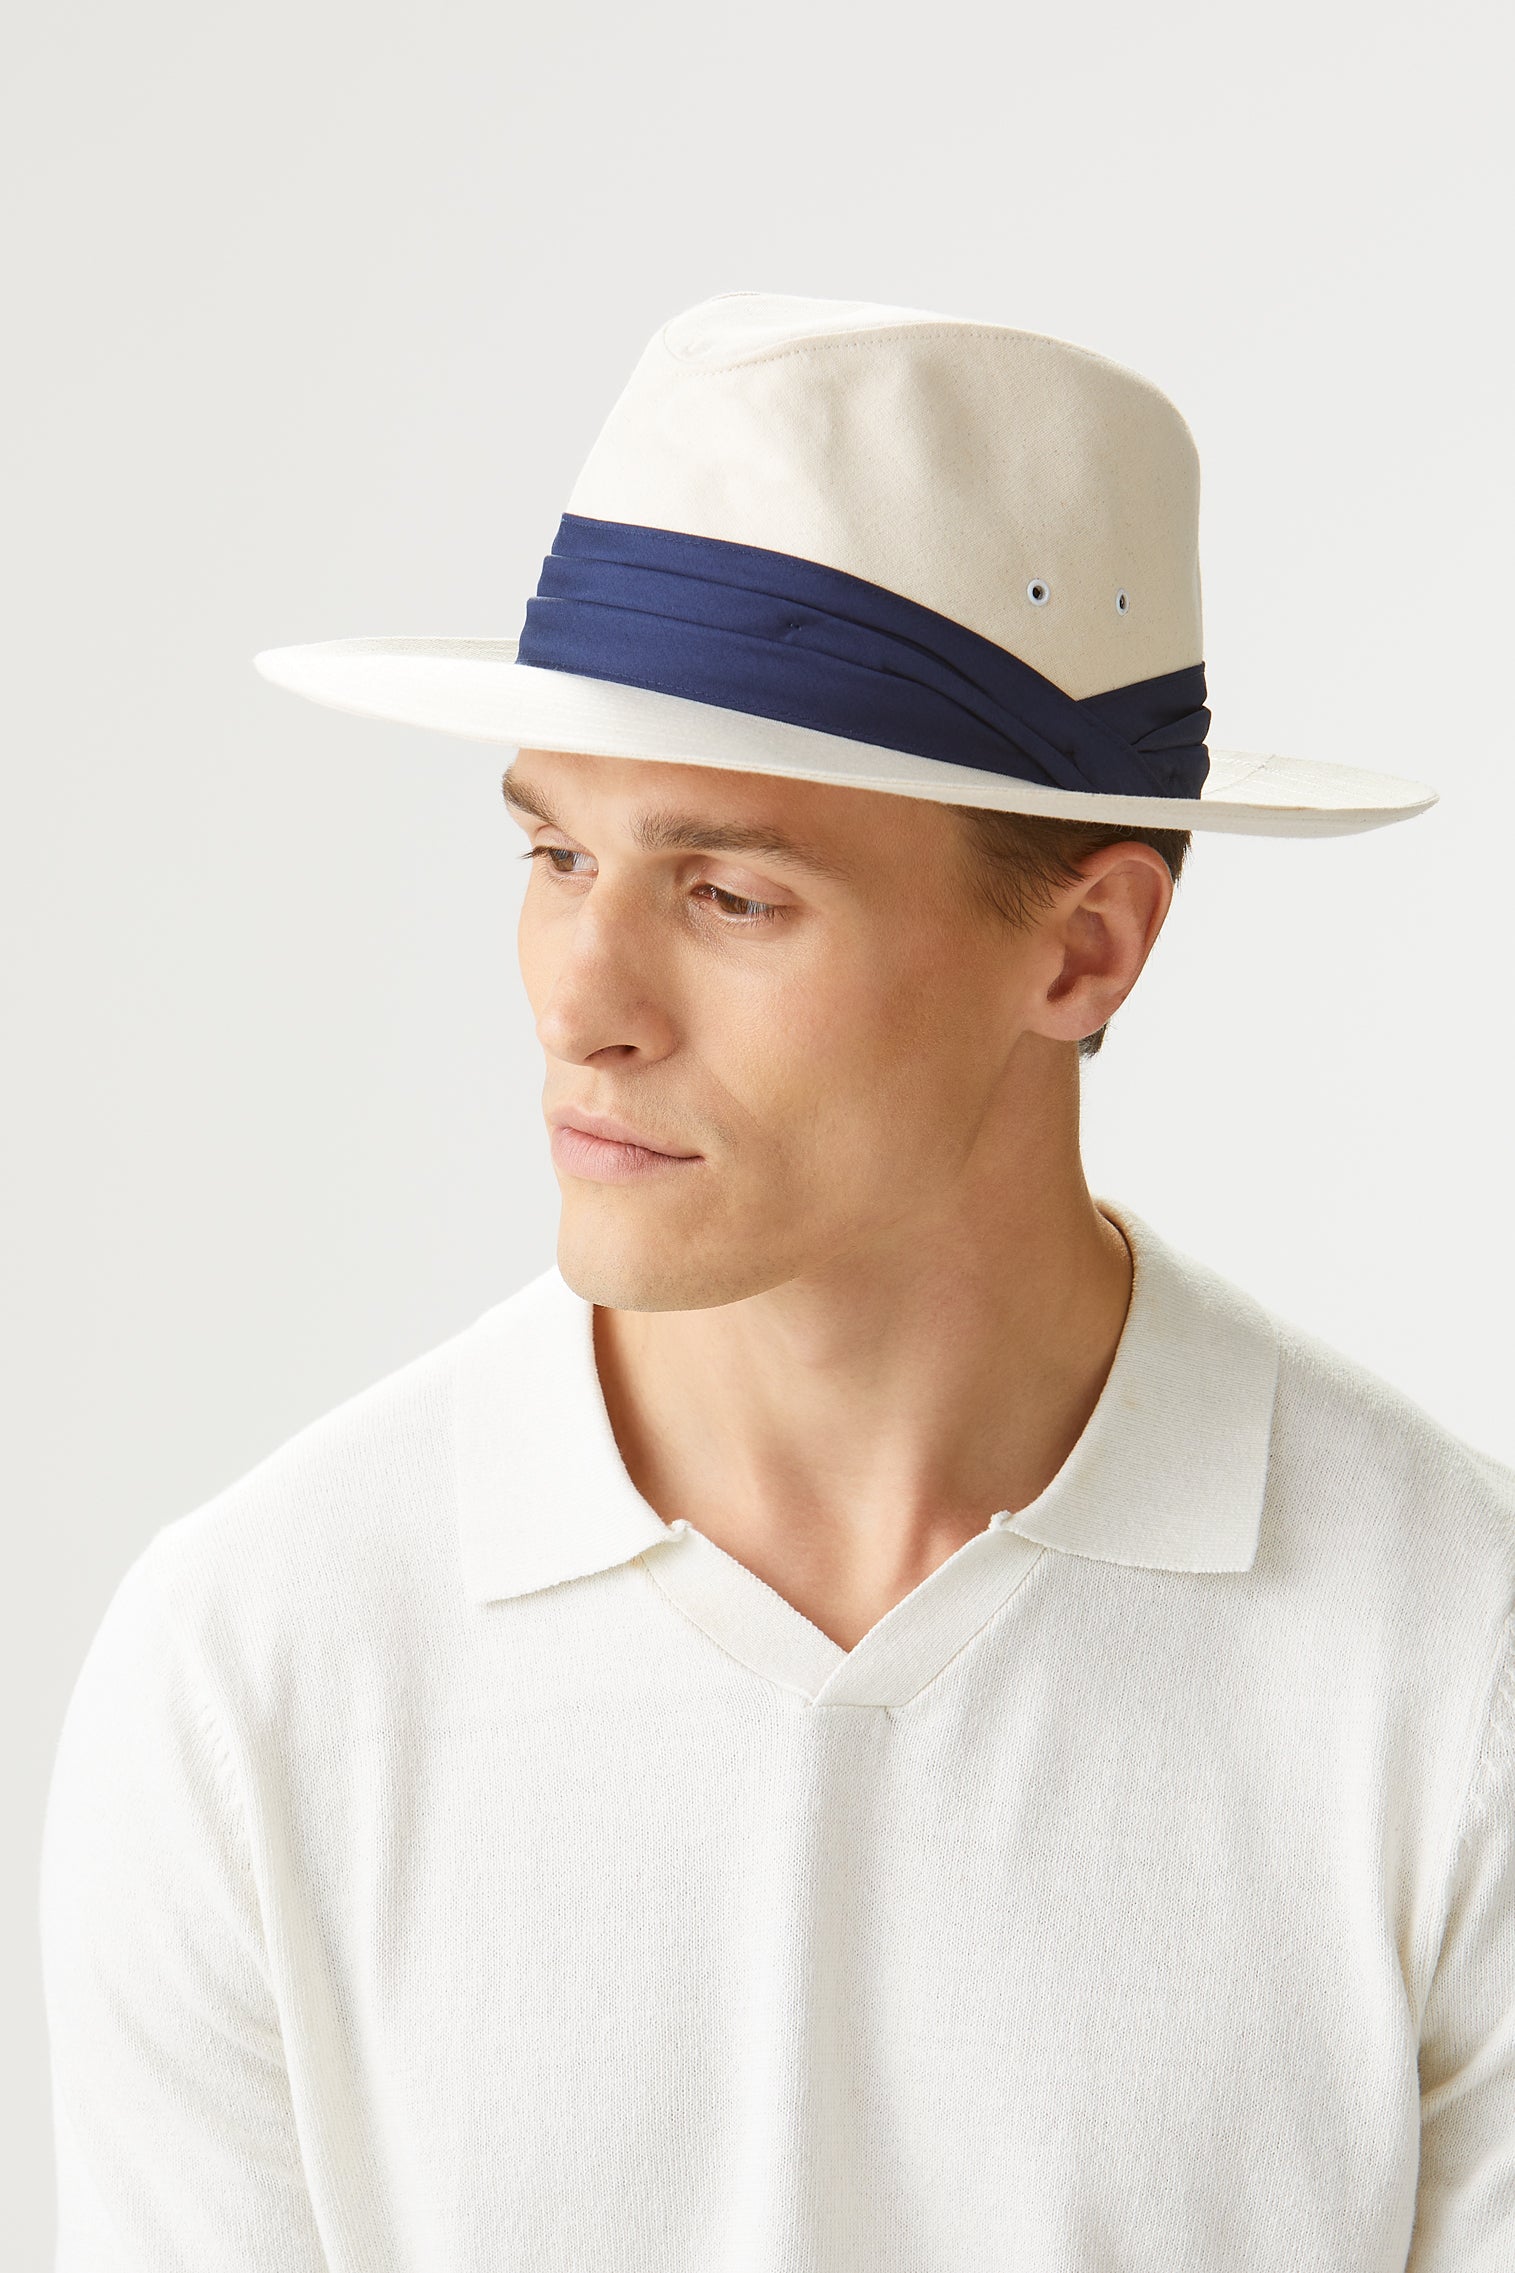 Namibia Calico Fedora - Hats for Tall People - Lock & Co. Hatters London UK